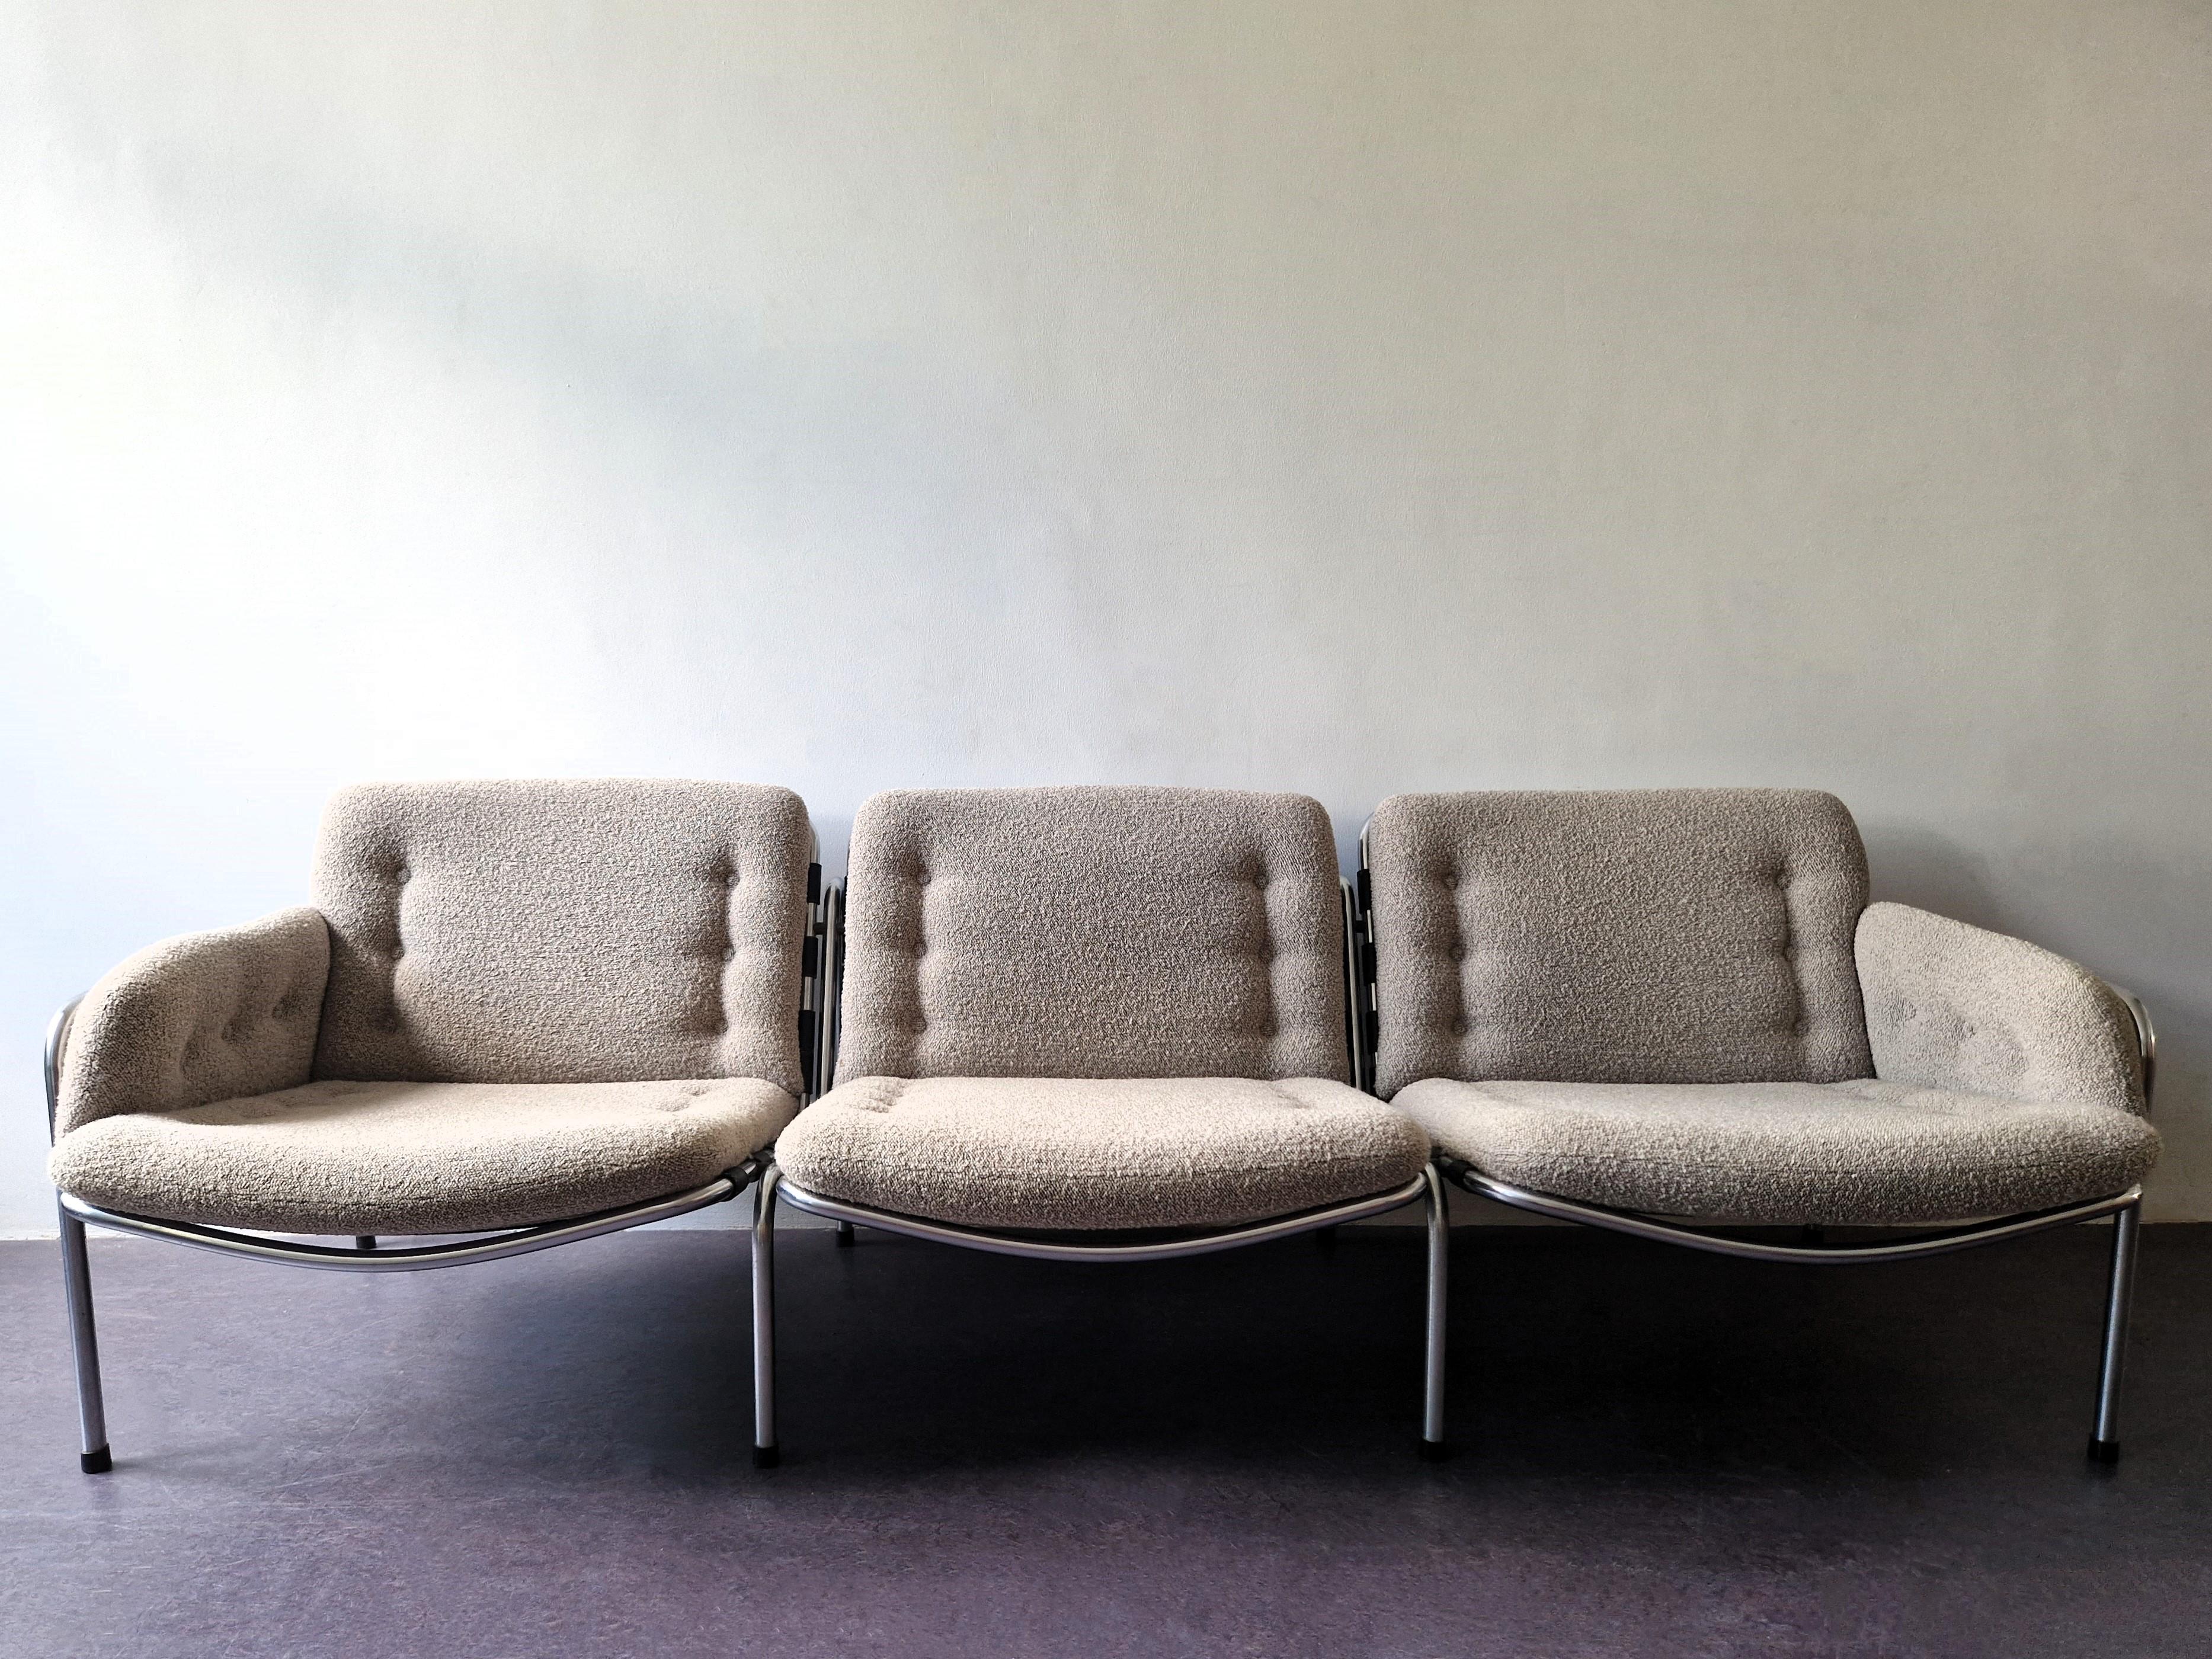 This model SZ12 3-seater sofa was designed by Martin Visser for 't Spectrum in 1969 (collection 1969-1974). It is part of the Osaka series that was exhibited at the World Fair in Japan (Osaka) in 1972. This sofa is therefore also known as model